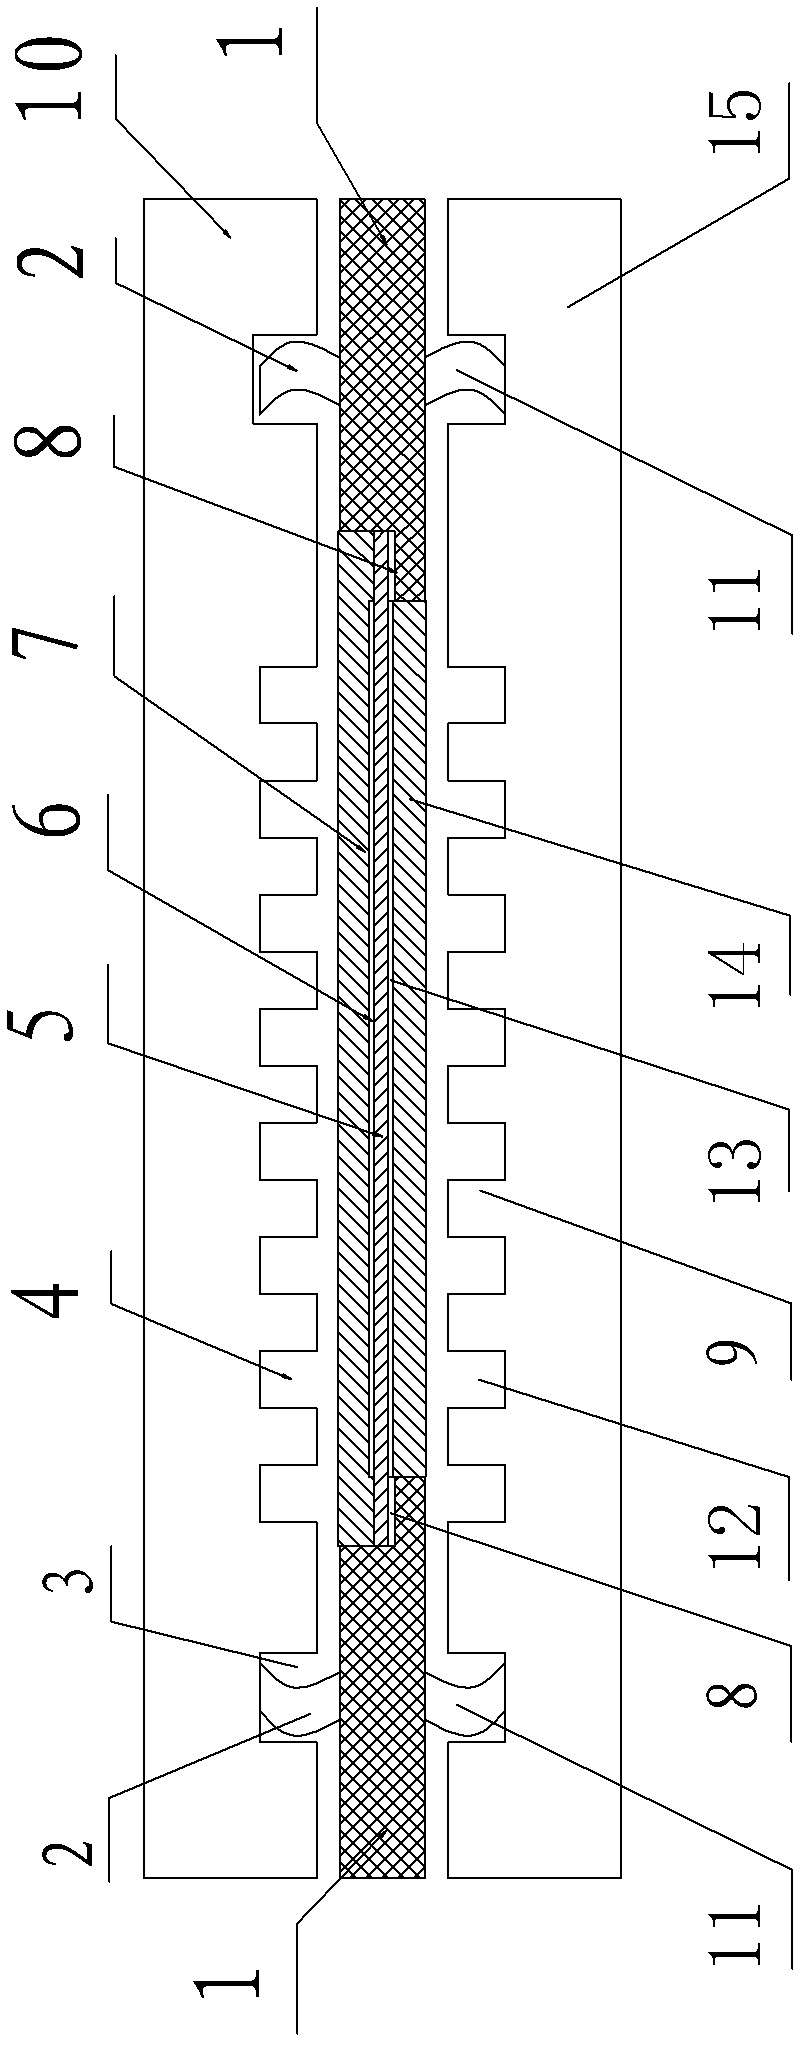 Self-locking fuel cell sealing assembly structure